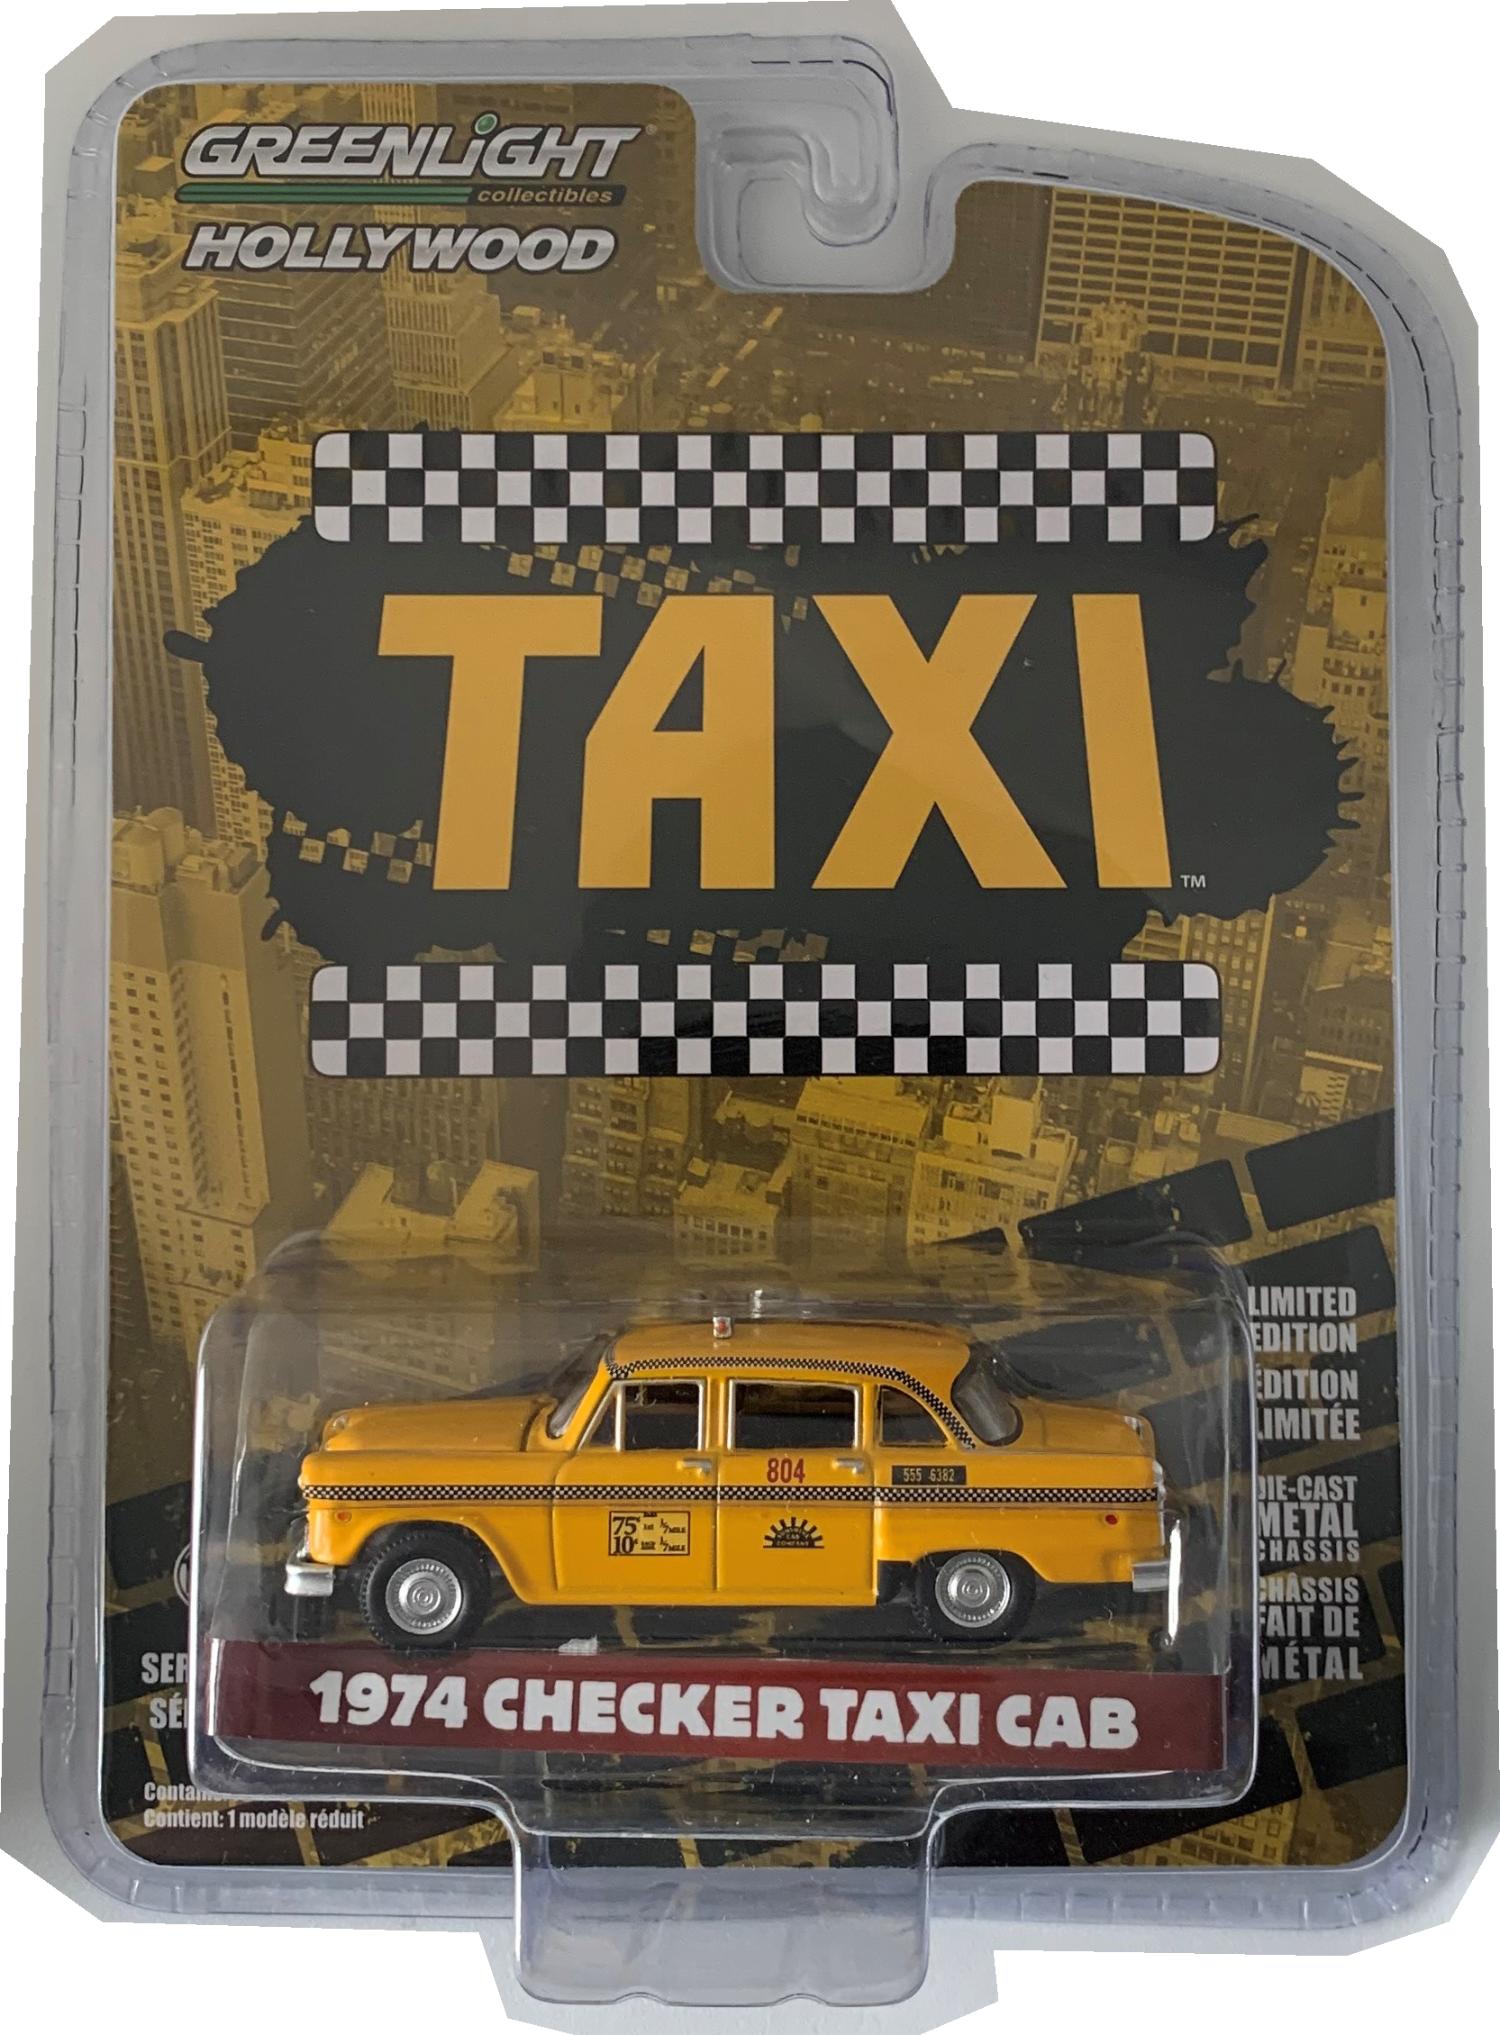 From the TV series Taxi, 1974 Checker Taxi Cab in yellow 1:64 scale model from Greenlight, Limited Edition model, series 29